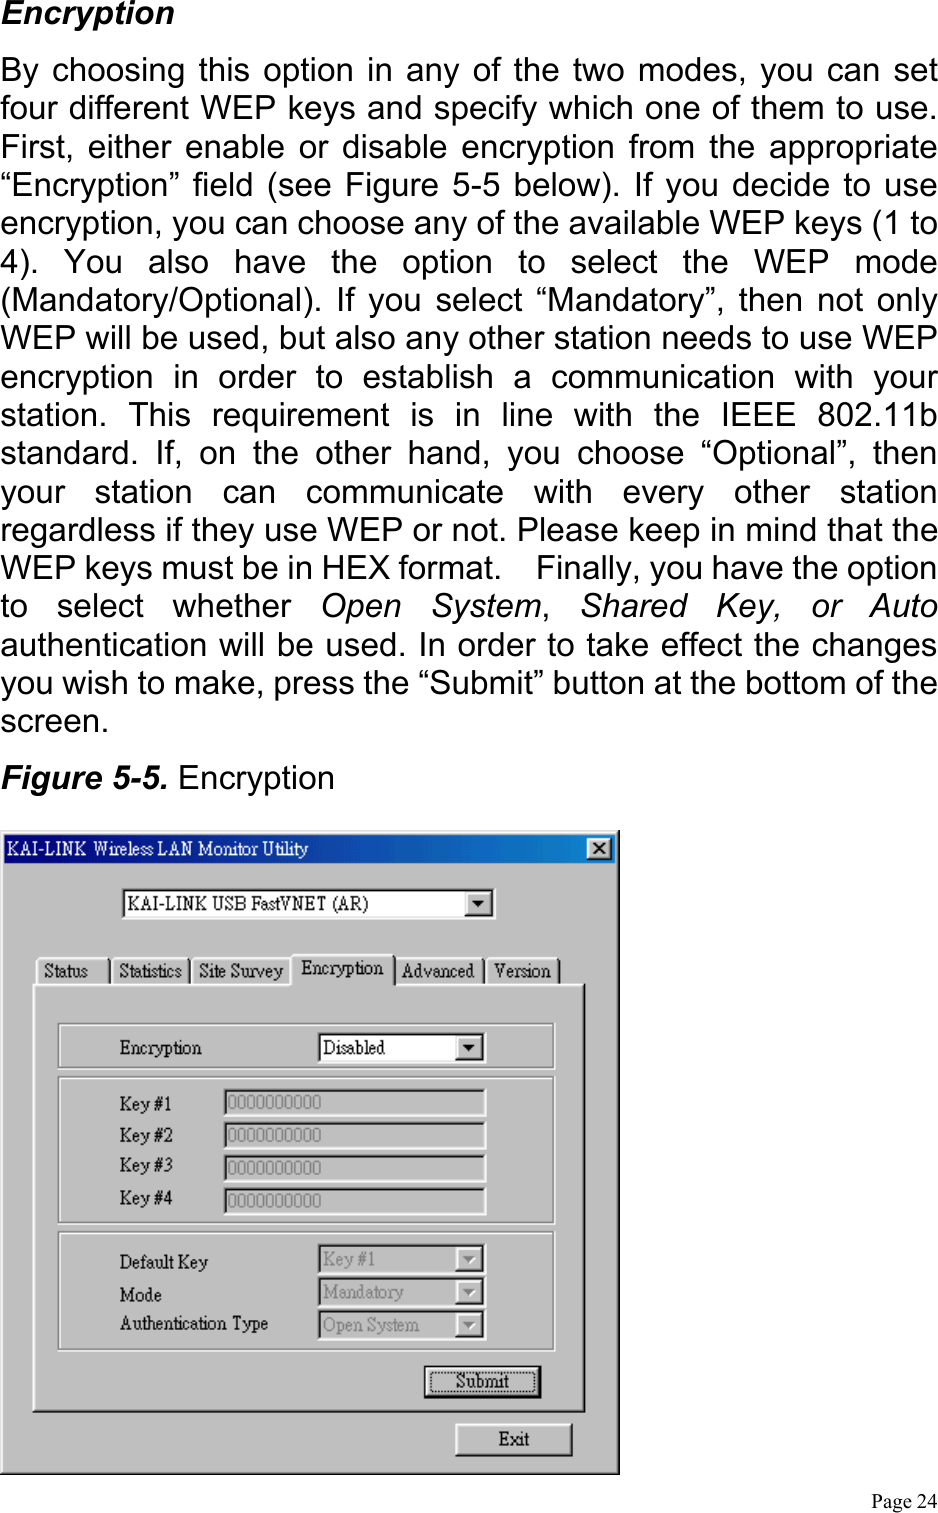  Page 24 Encryption By choosing this option in any of the two modes, you can set four different WEP keys and specify which one of them to use. First, either enable or disable encryption from the appropriate “Encryption” field (see Figure 5-5 below). If you decide to use encryption, you can choose any of the available WEP keys (1 to 4). You also have the option to select the WEP mode (Mandatory/Optional). If you select “Mandatory”, then not only WEP will be used, but also any other station needs to use WEP encryption in order to establish a communication with your station. This requirement is in line with the IEEE 802.11b standard. If, on the other hand, you choose “Optional”, then your station can communicate with every other station regardless if they use WEP or not. Please keep in mind that the WEP keys must be in HEX format.    Finally, you have the option to select whether Open System,  Shared Key, or Auto authentication will be used. In order to take effect the changes you wish to make, press the “Submit” button at the bottom of the screen. Figure 5-5. Encryption  